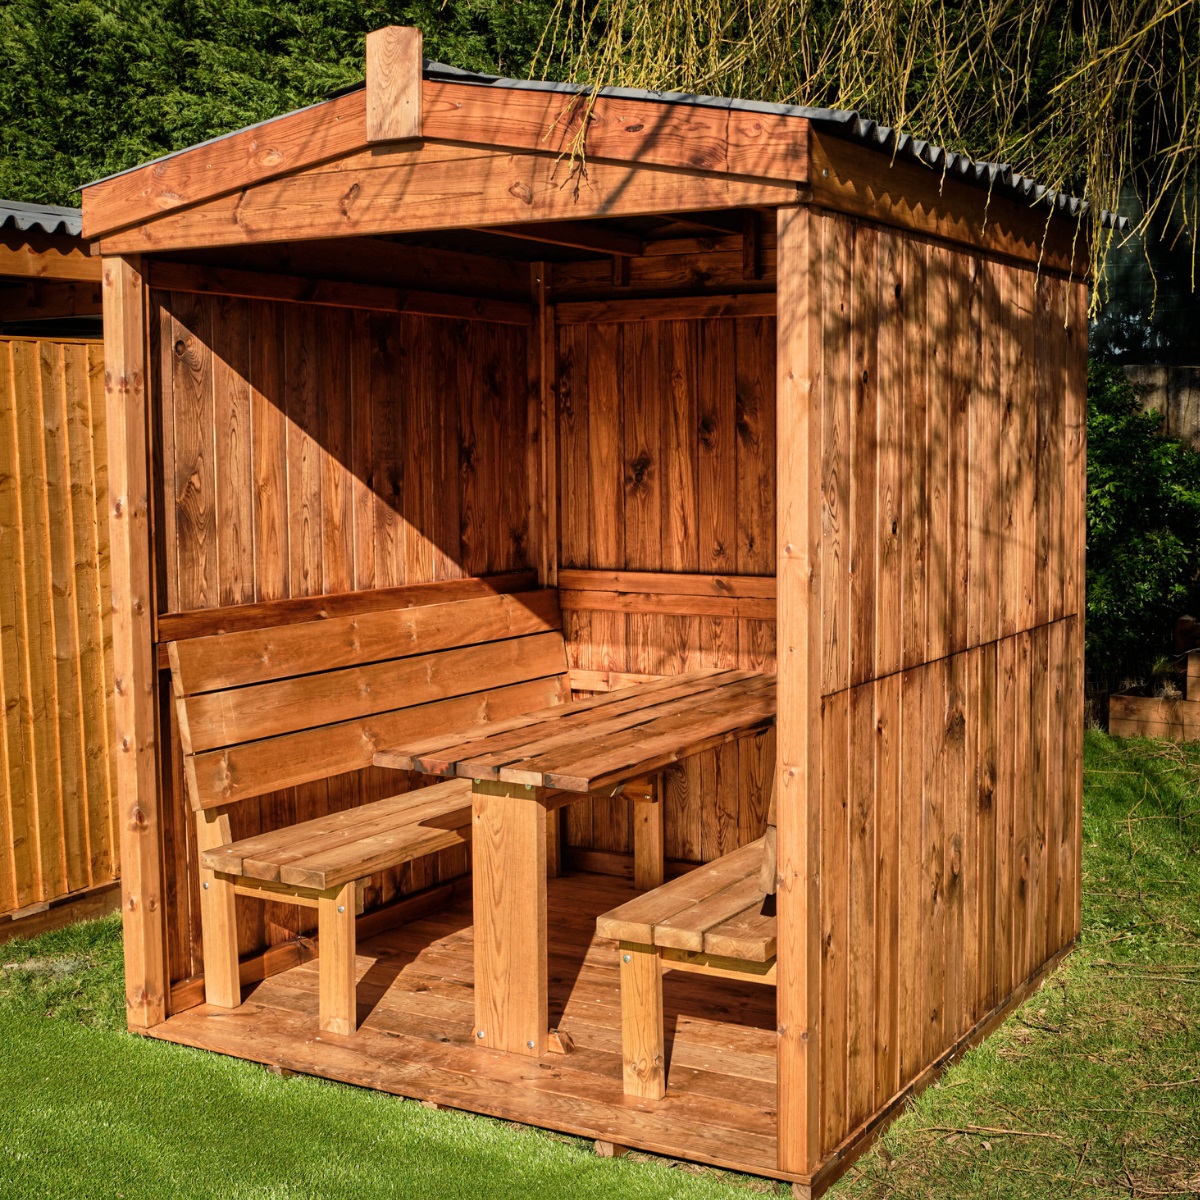 A wooden outdoor dining cabin, enclosed on 3 sides with an open side showing bench seats and a table seating up to 6 people the cabin has a pitched apex water proof roof